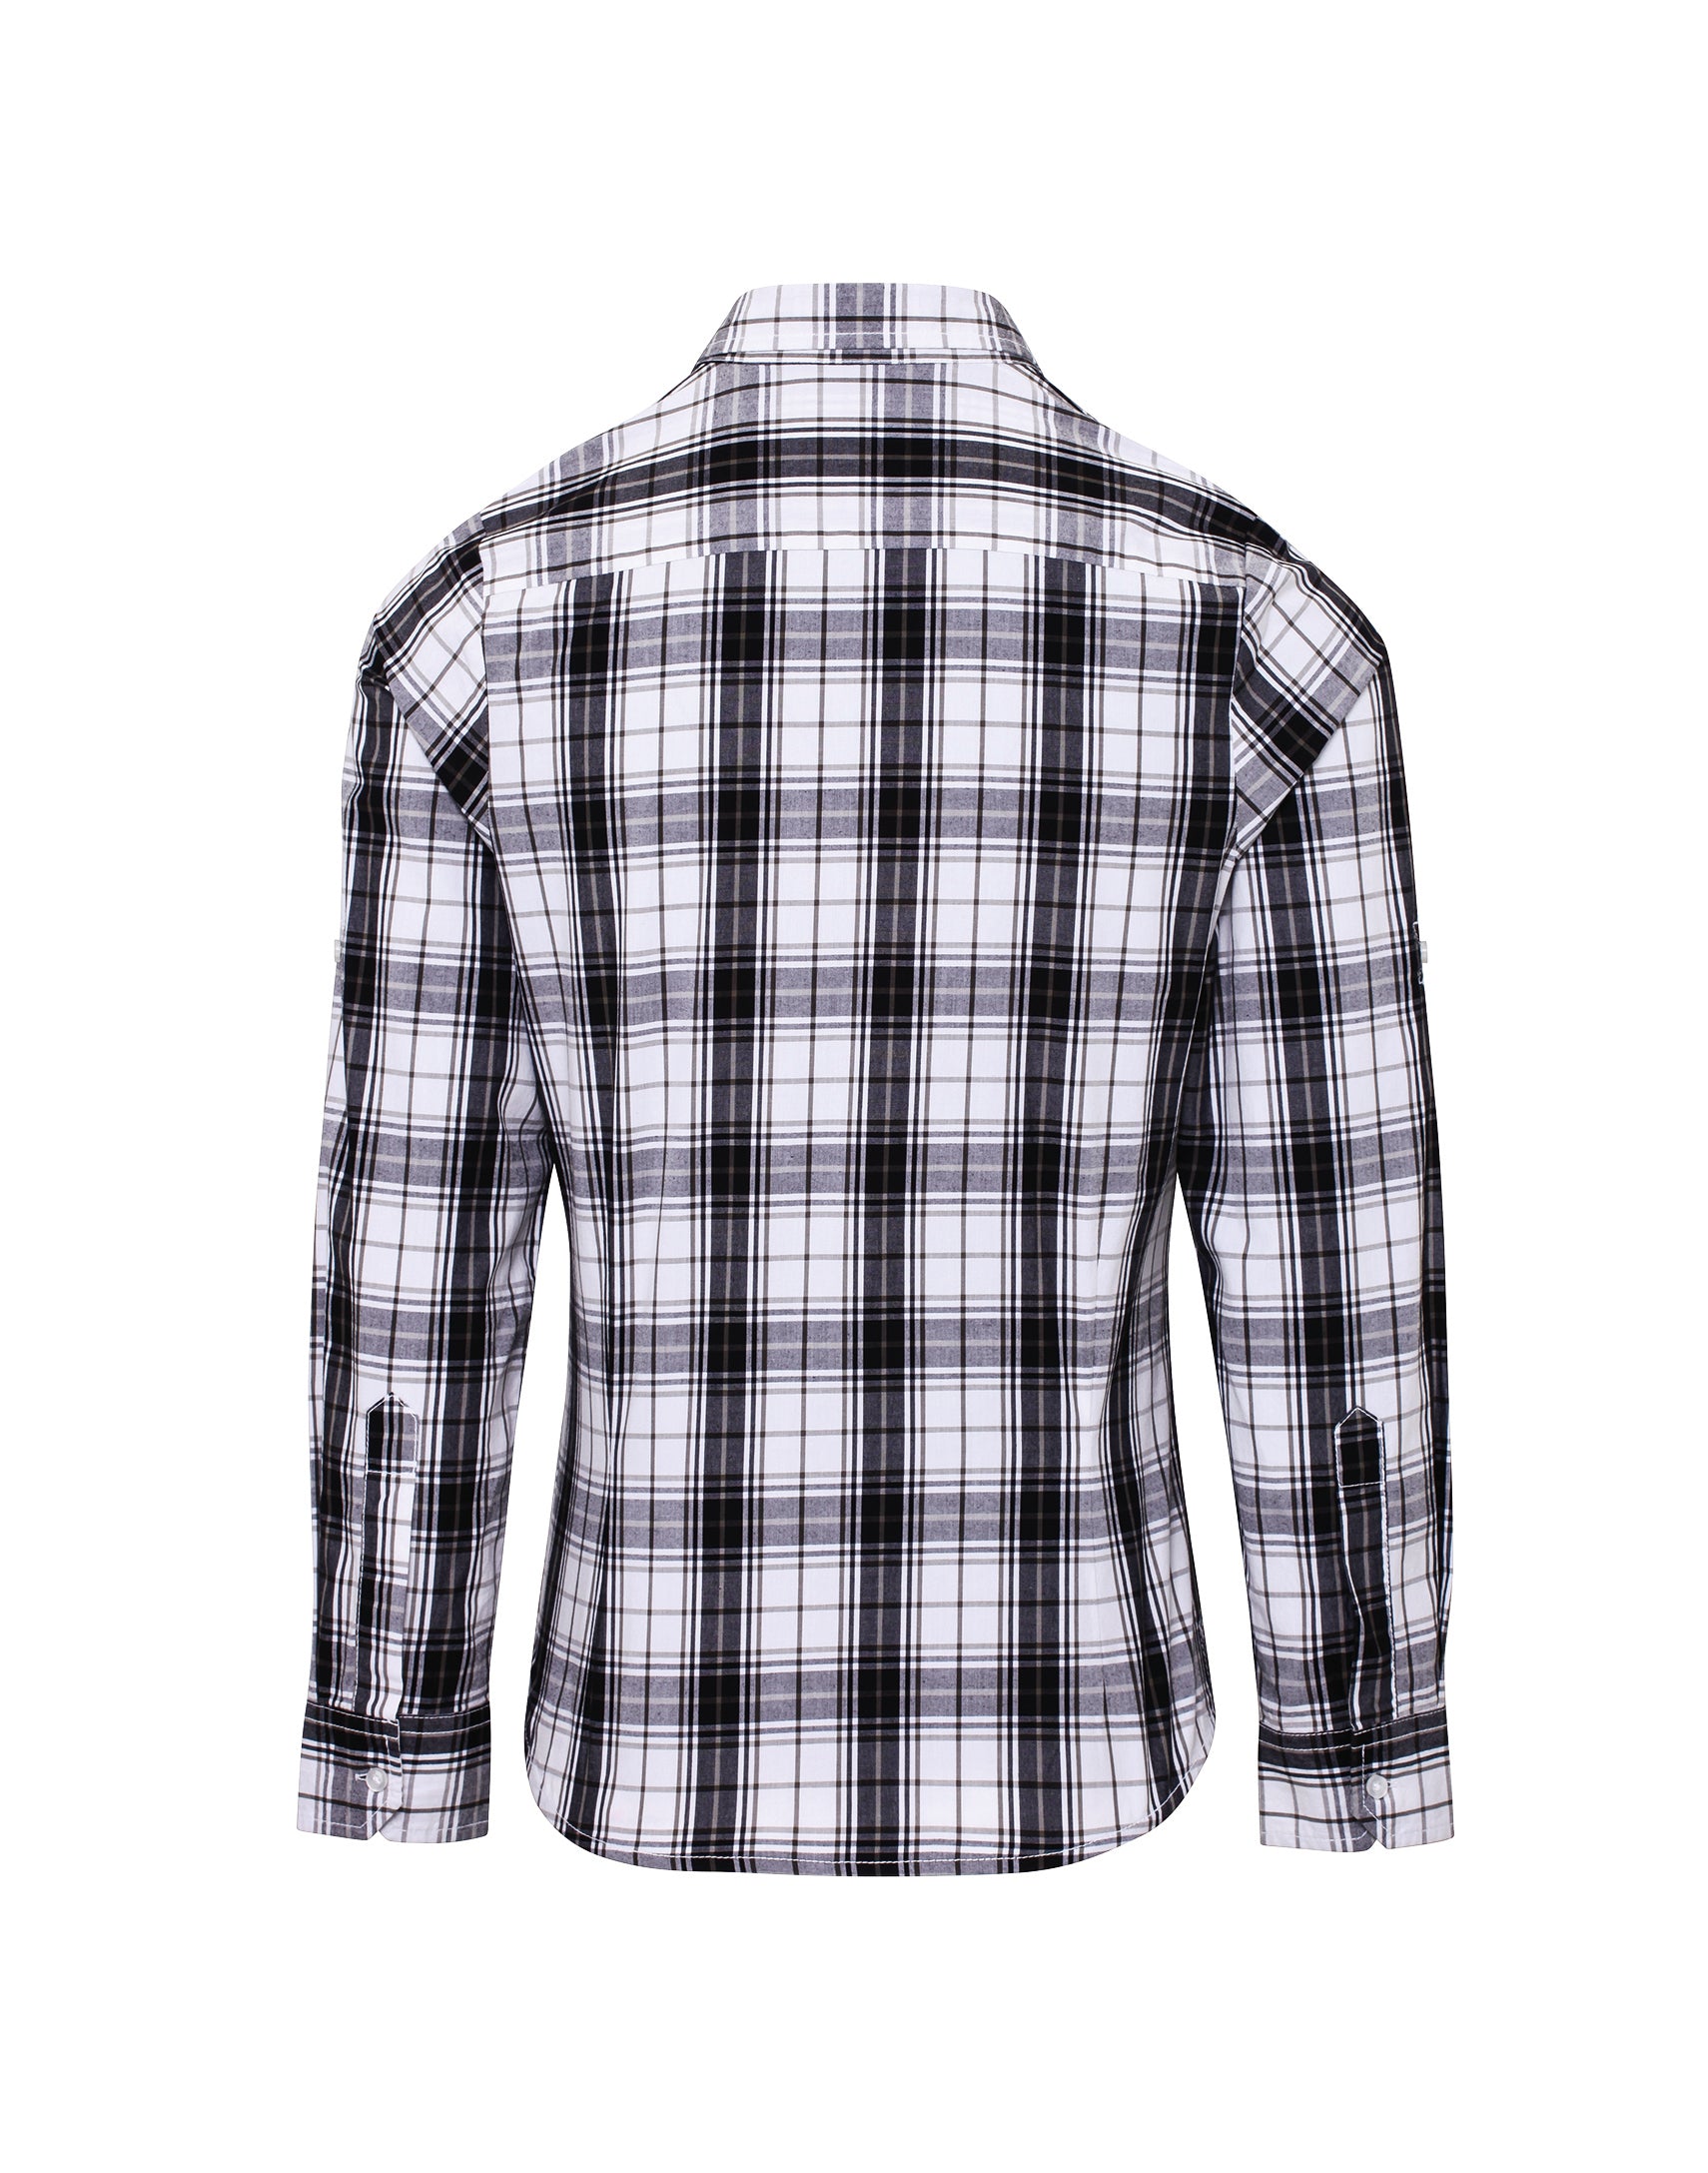 Ginmill check cotton long sleeve shirt - Premier Collection